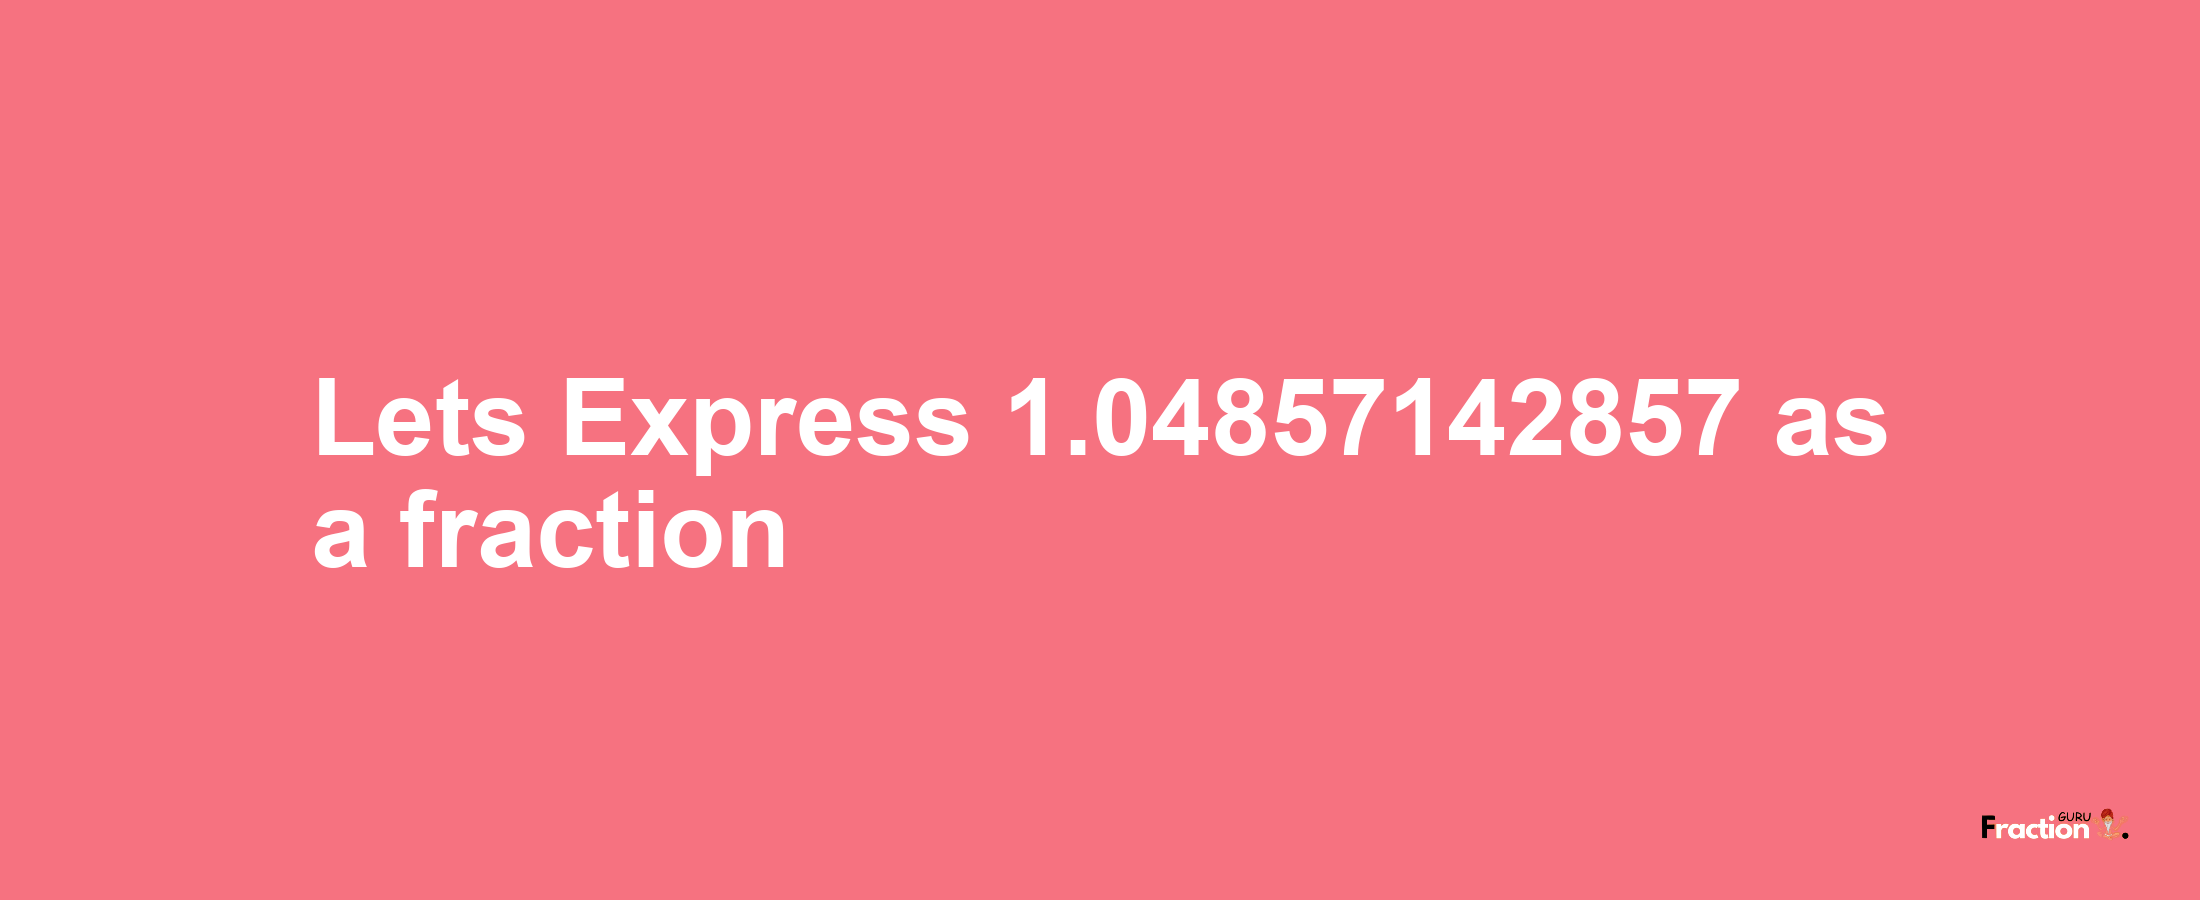 Lets Express 1.04857142857 as afraction